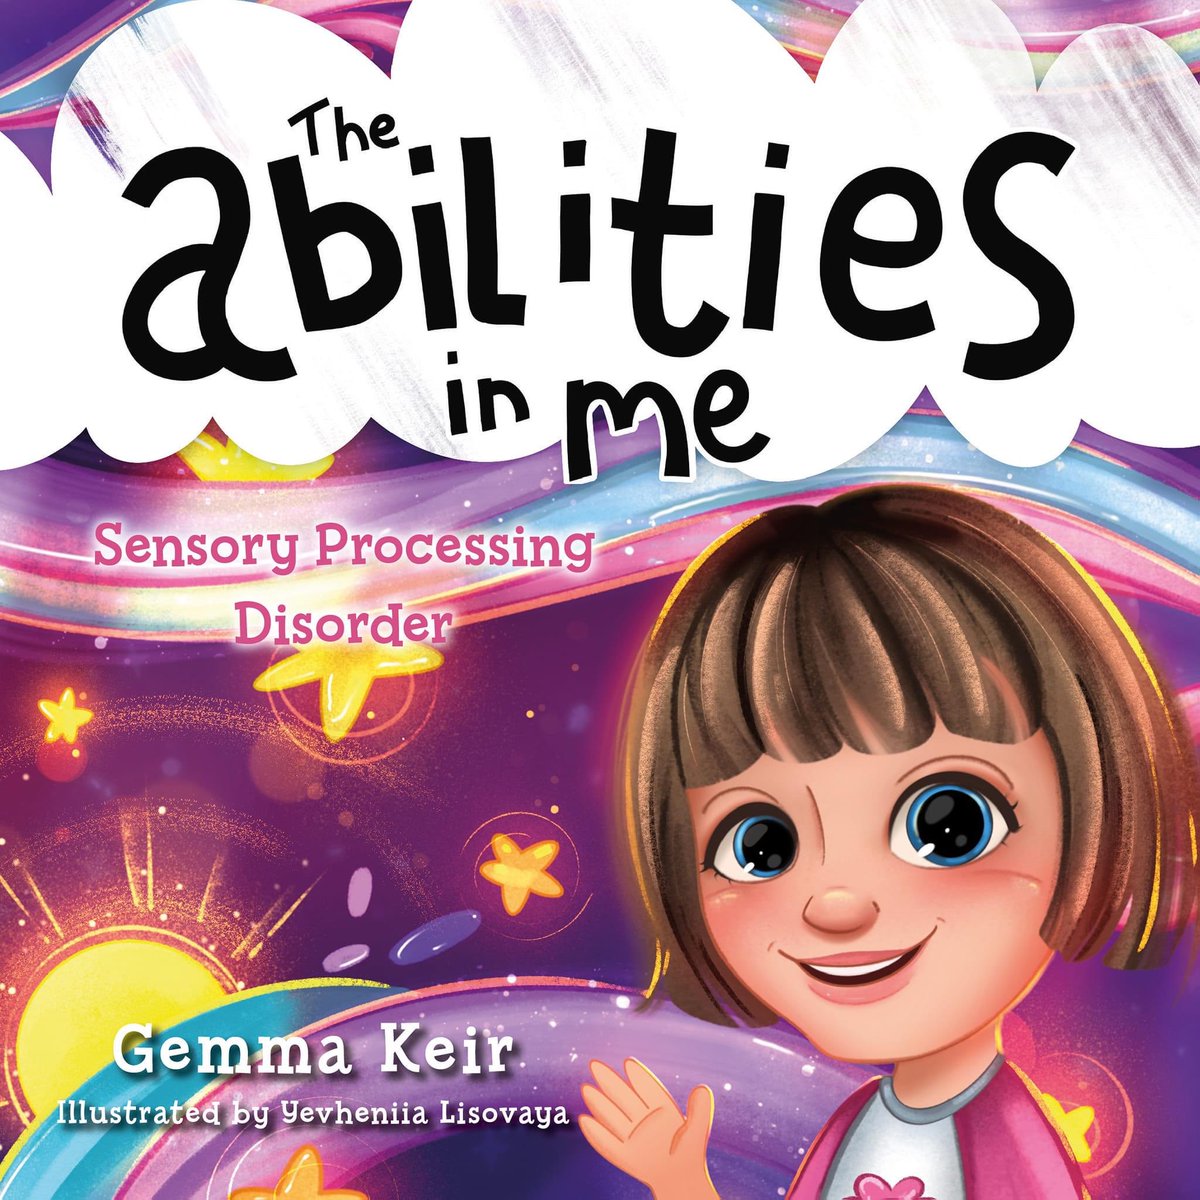 NEW! A welcome additional and we can’t wait to see it! @abilitiesinme #SensoryProcessingDisorder #SPD #ASD #ASC #Autism #Autistic #Books #DisabilityBooks #SEND #SEN